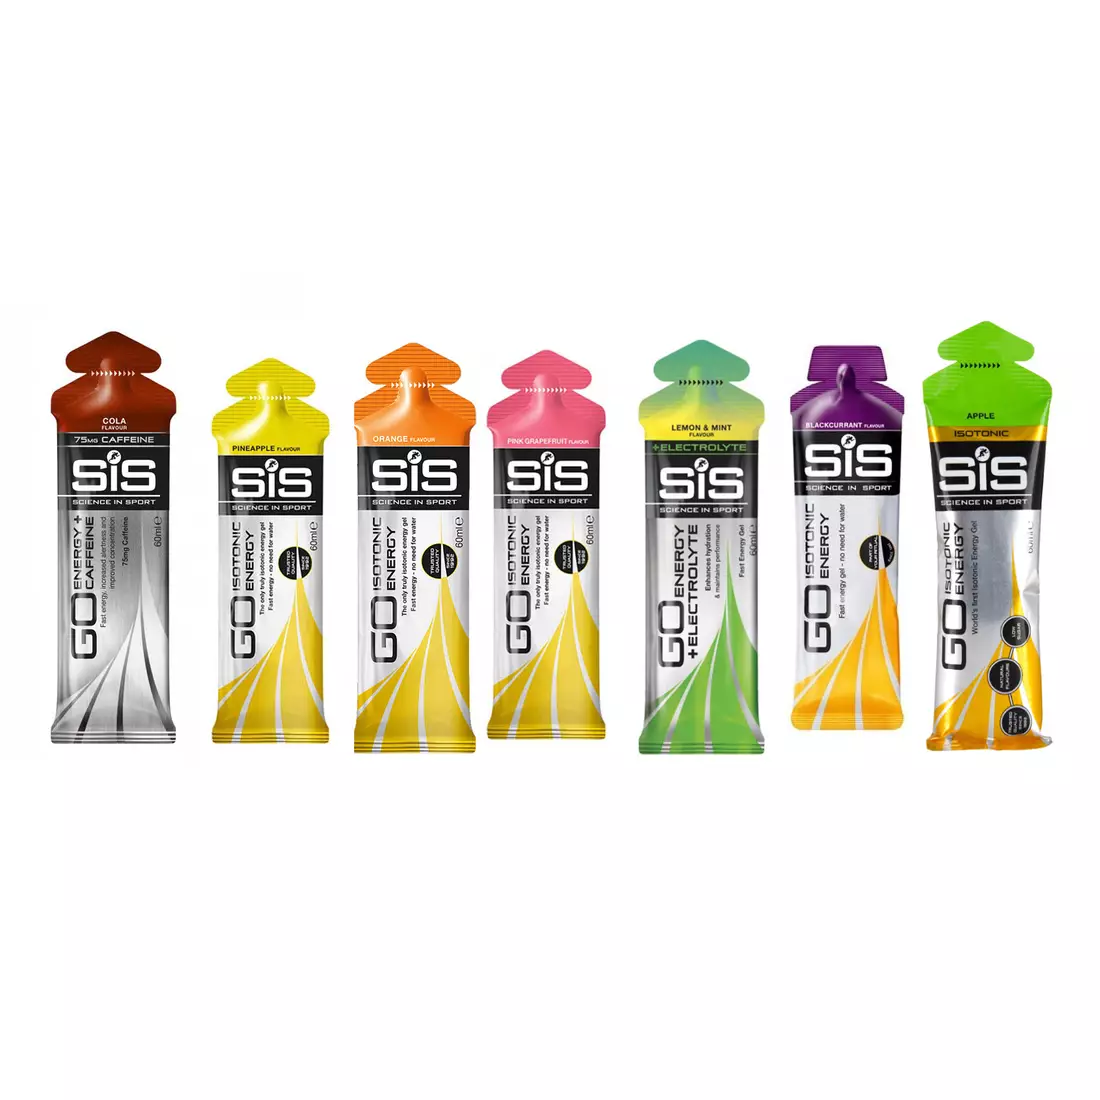 SIS Set of 7x isotonic gels, various flavors, 7x60ml